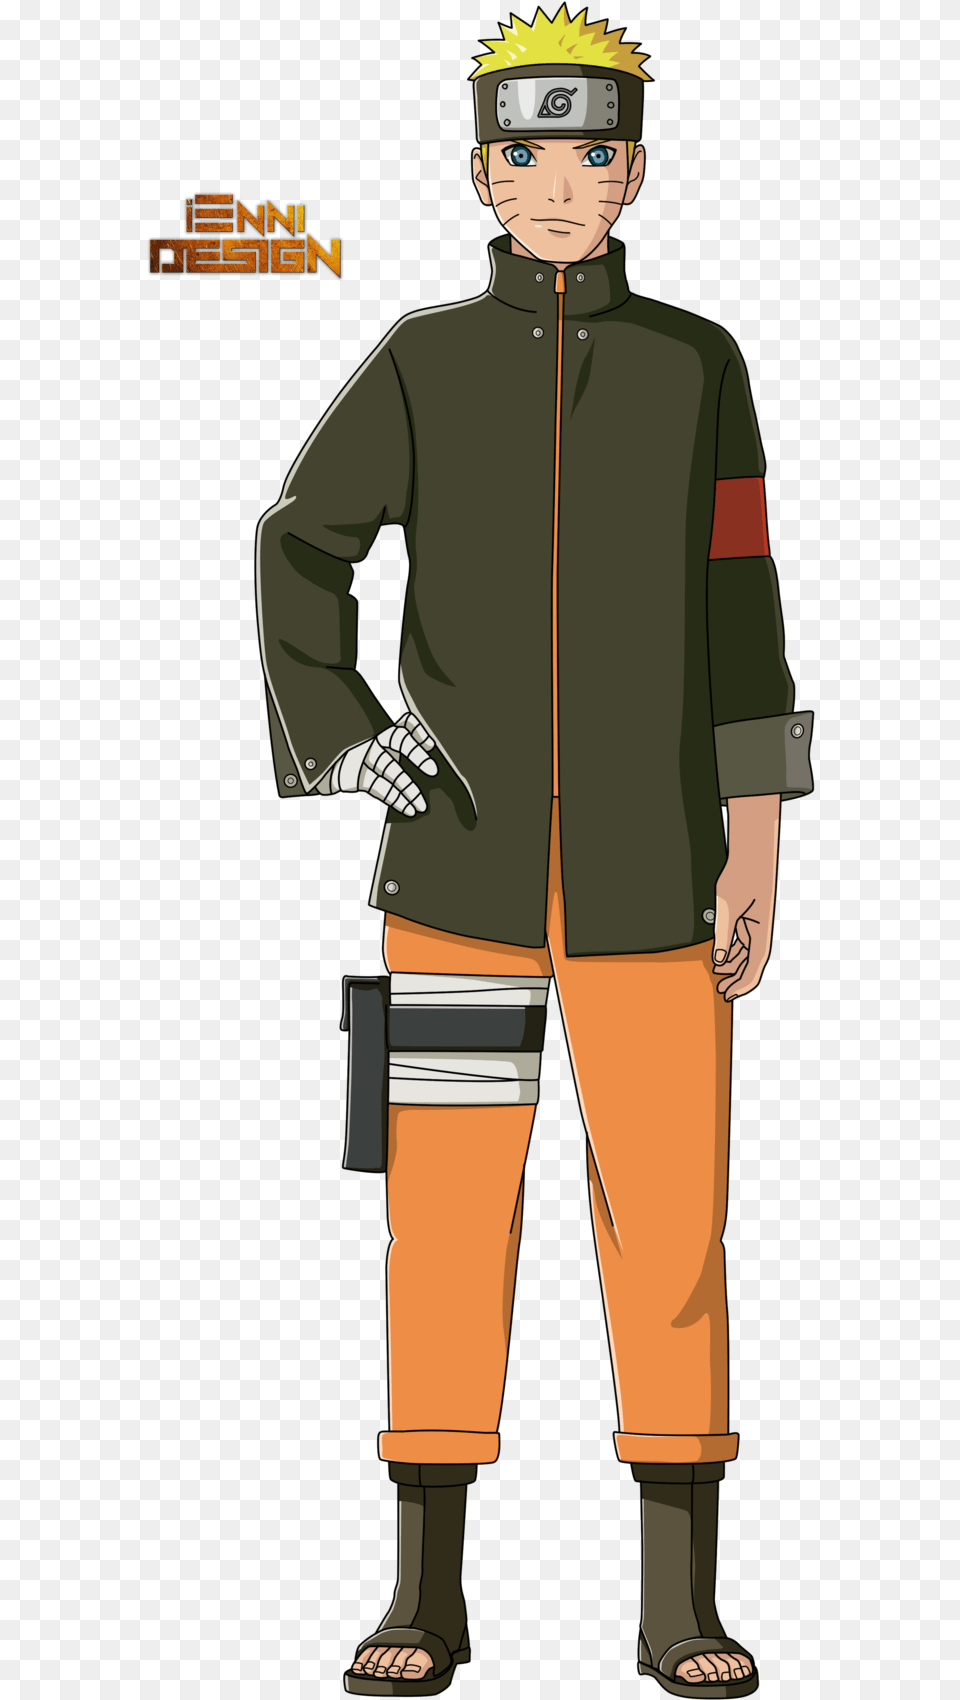 Download Naruto The Last Transparent For Designing Naruto Uzumaki Naruto The Last, Sleeve, Long Sleeve, Clothing, Adult Png